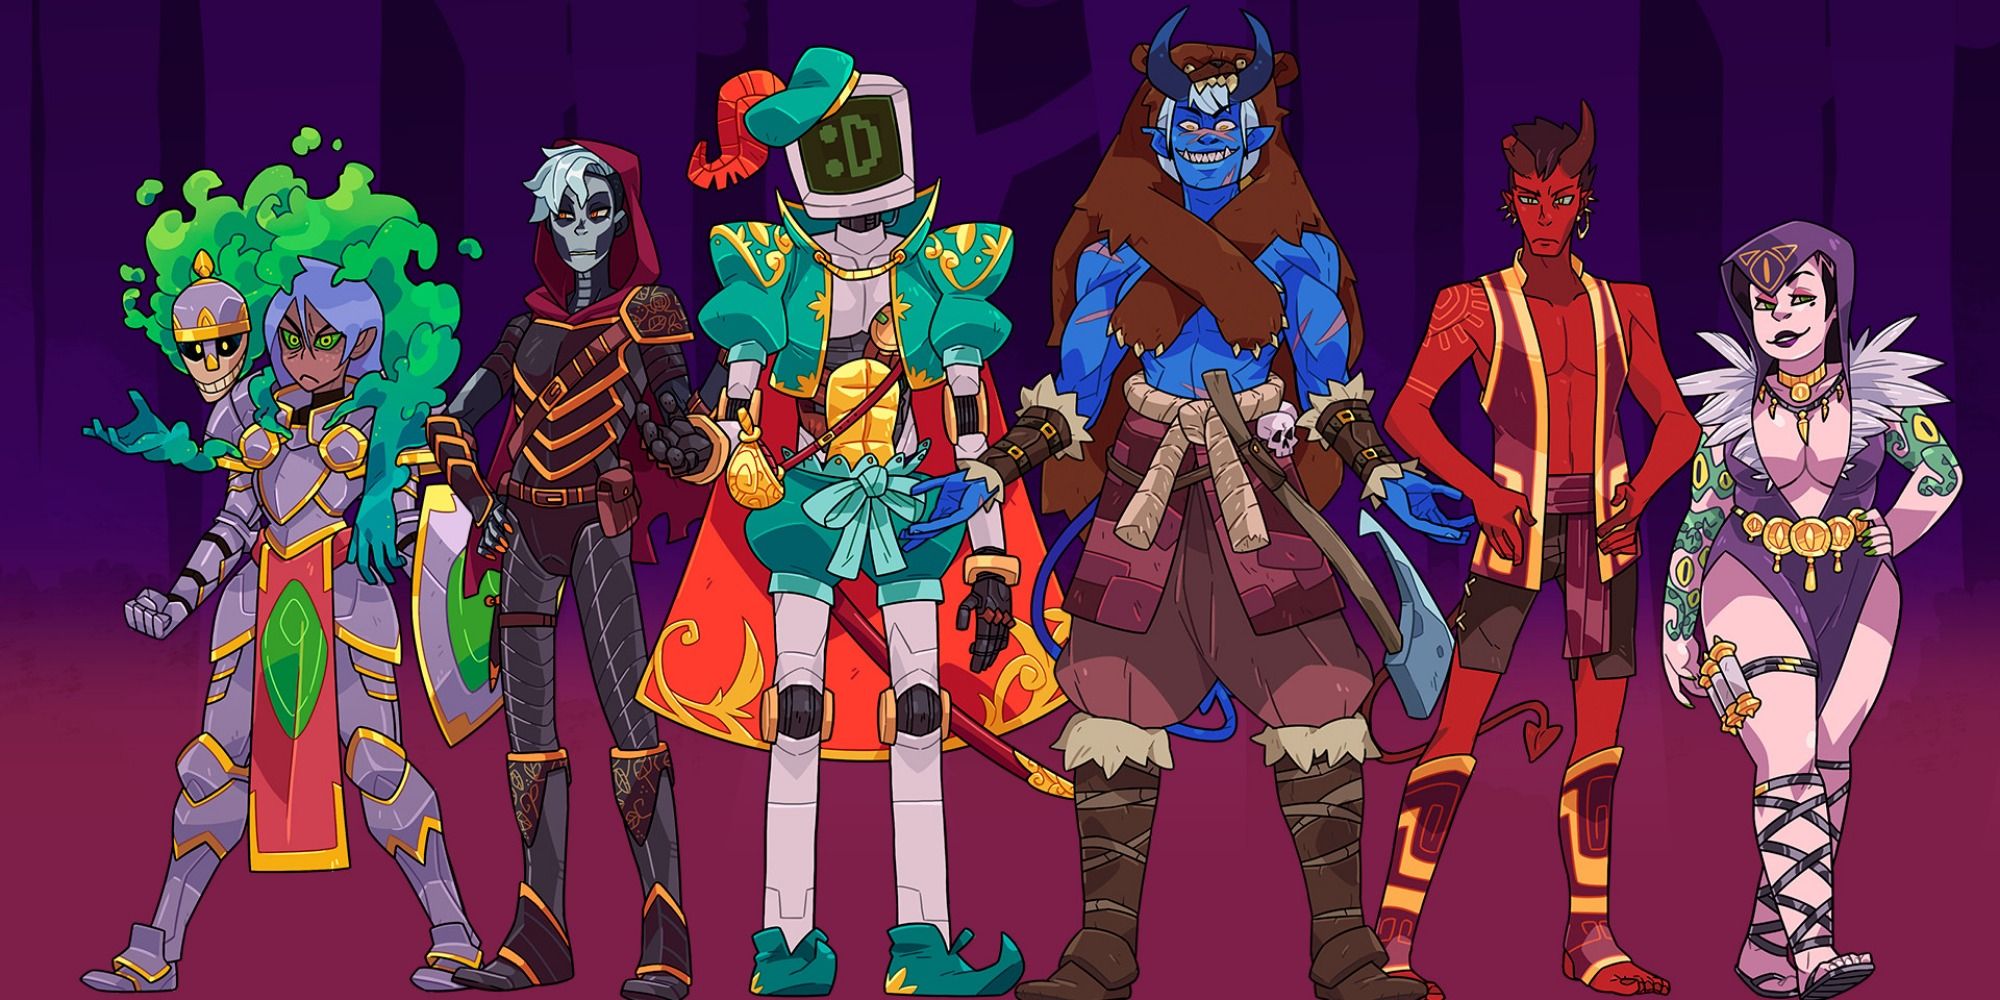 Monster Camp - The Main Cast Standing In A Row. From Left To Right: Aaravi, Milo, Calculester, Dahlia, Damien, And Joy